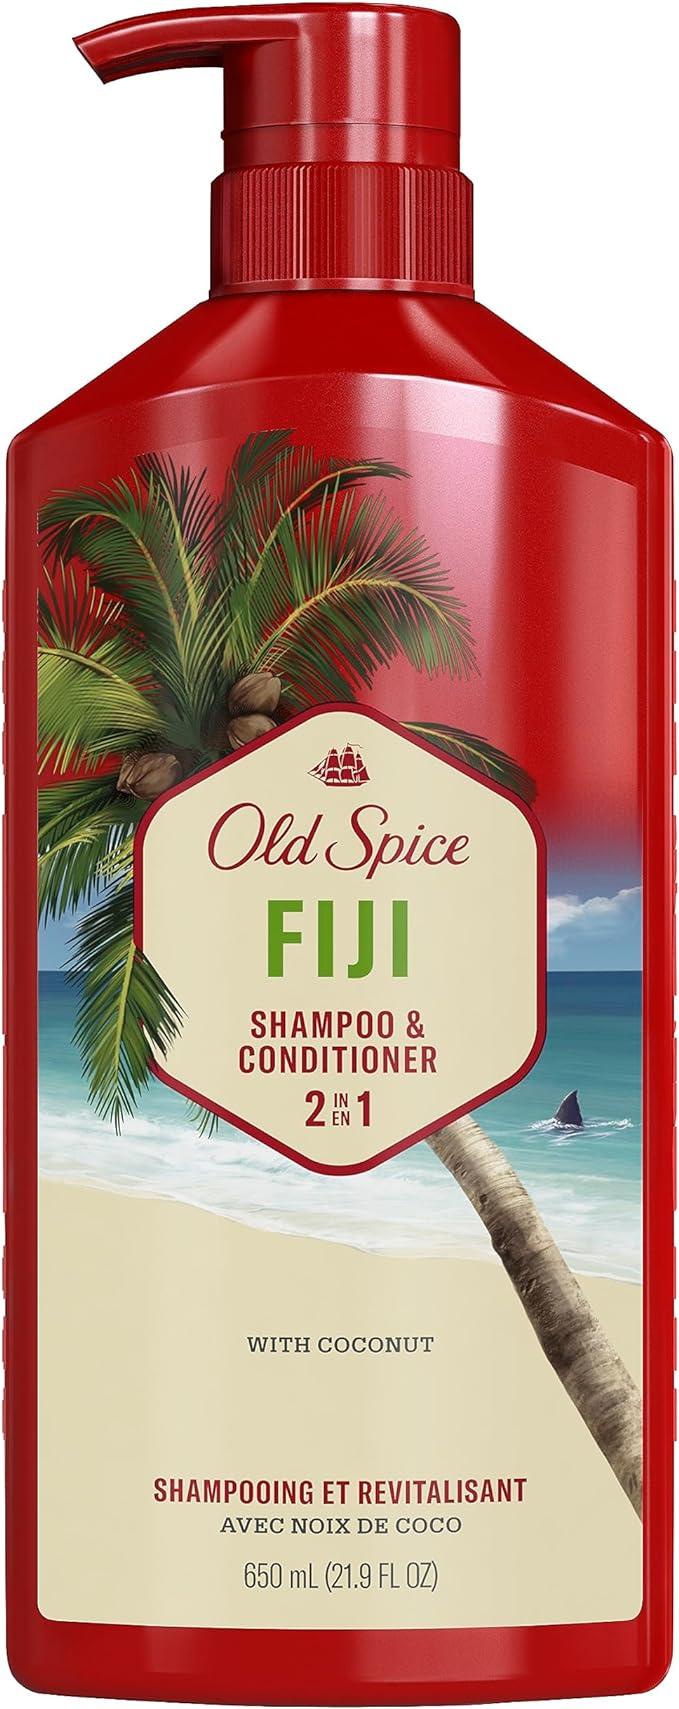 Old Spice Fiji 2in1 Shampoo And Conditioner For Men 650 Milliliters